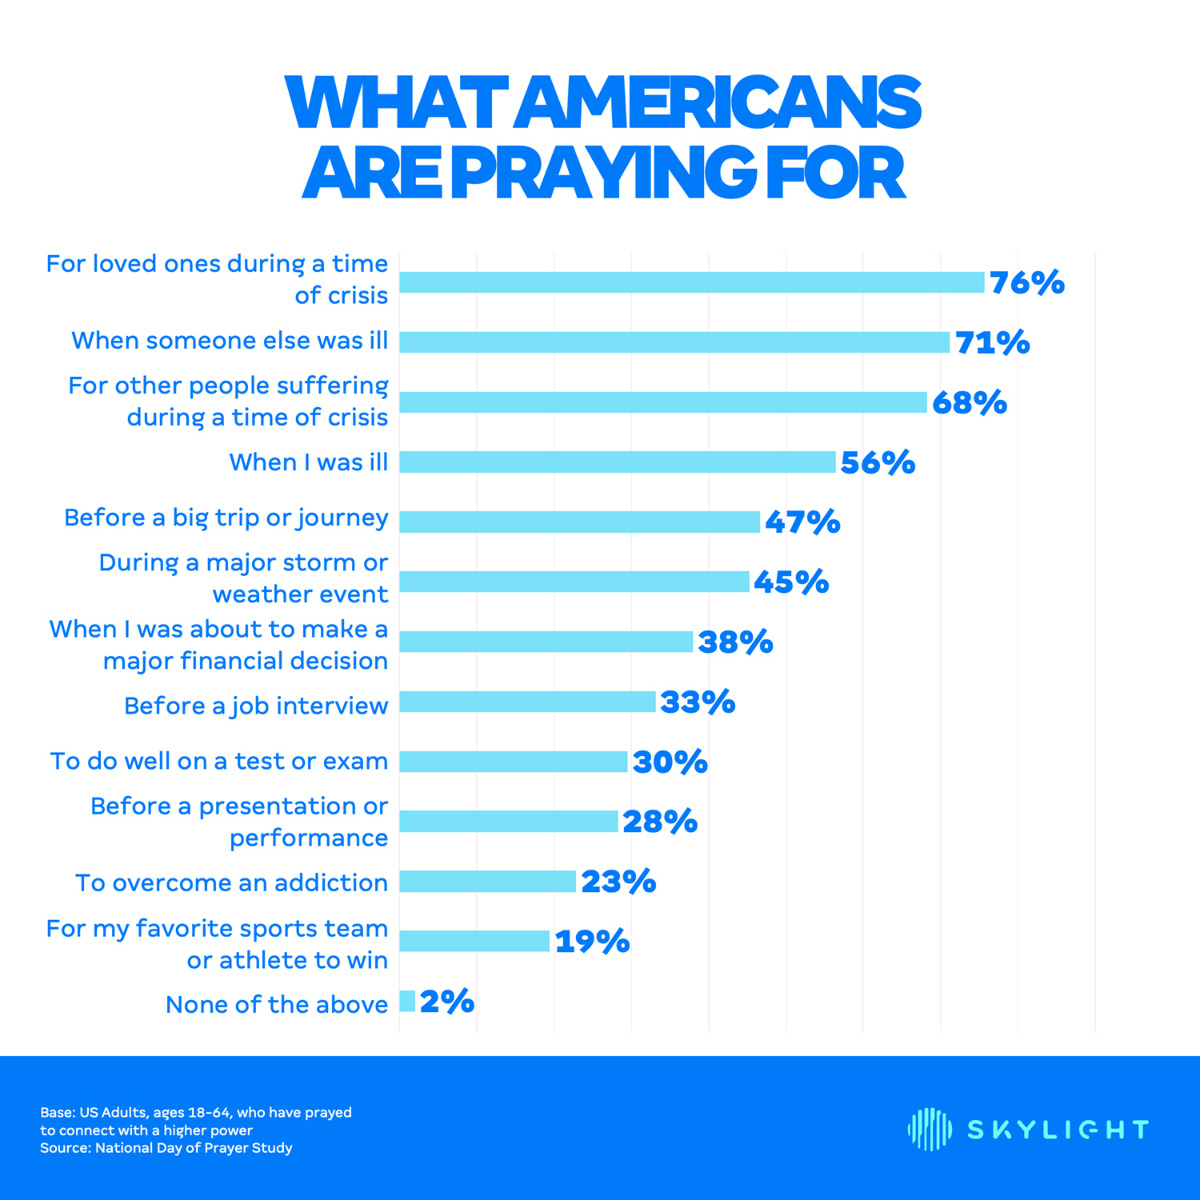 US - Skylight - What Americans are praying for